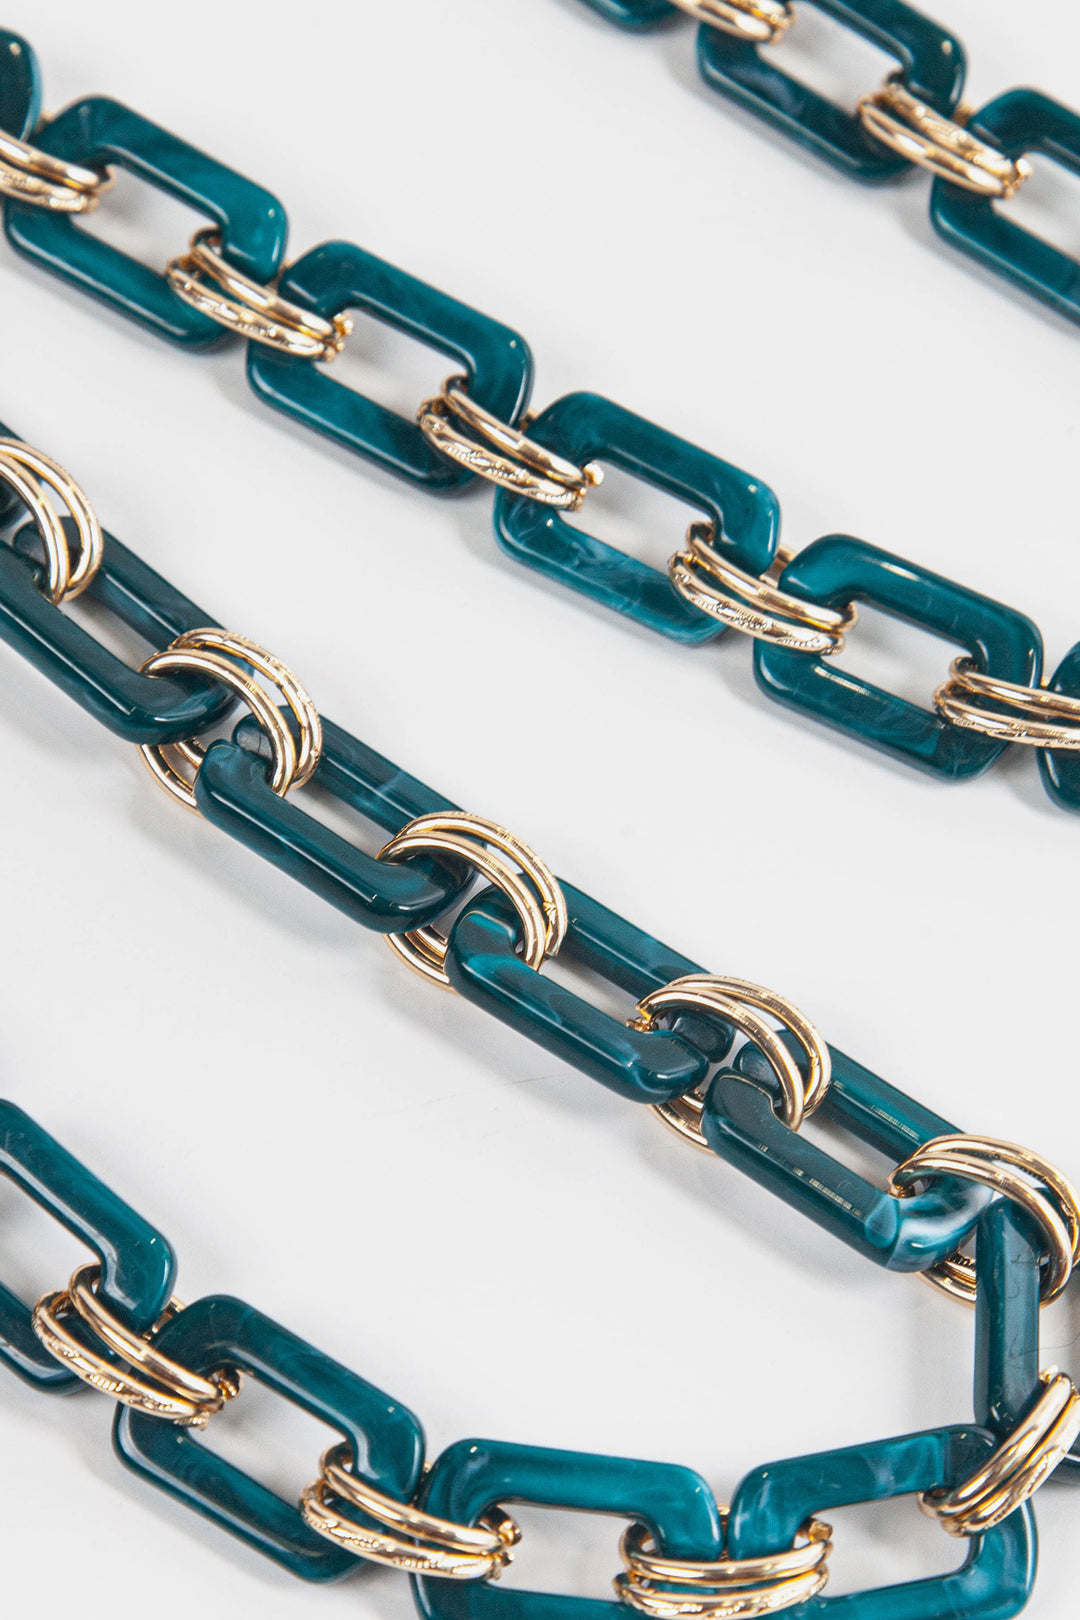 close up of the teal square link acrylic bag strap each link is adjoined by two gold metal hoops